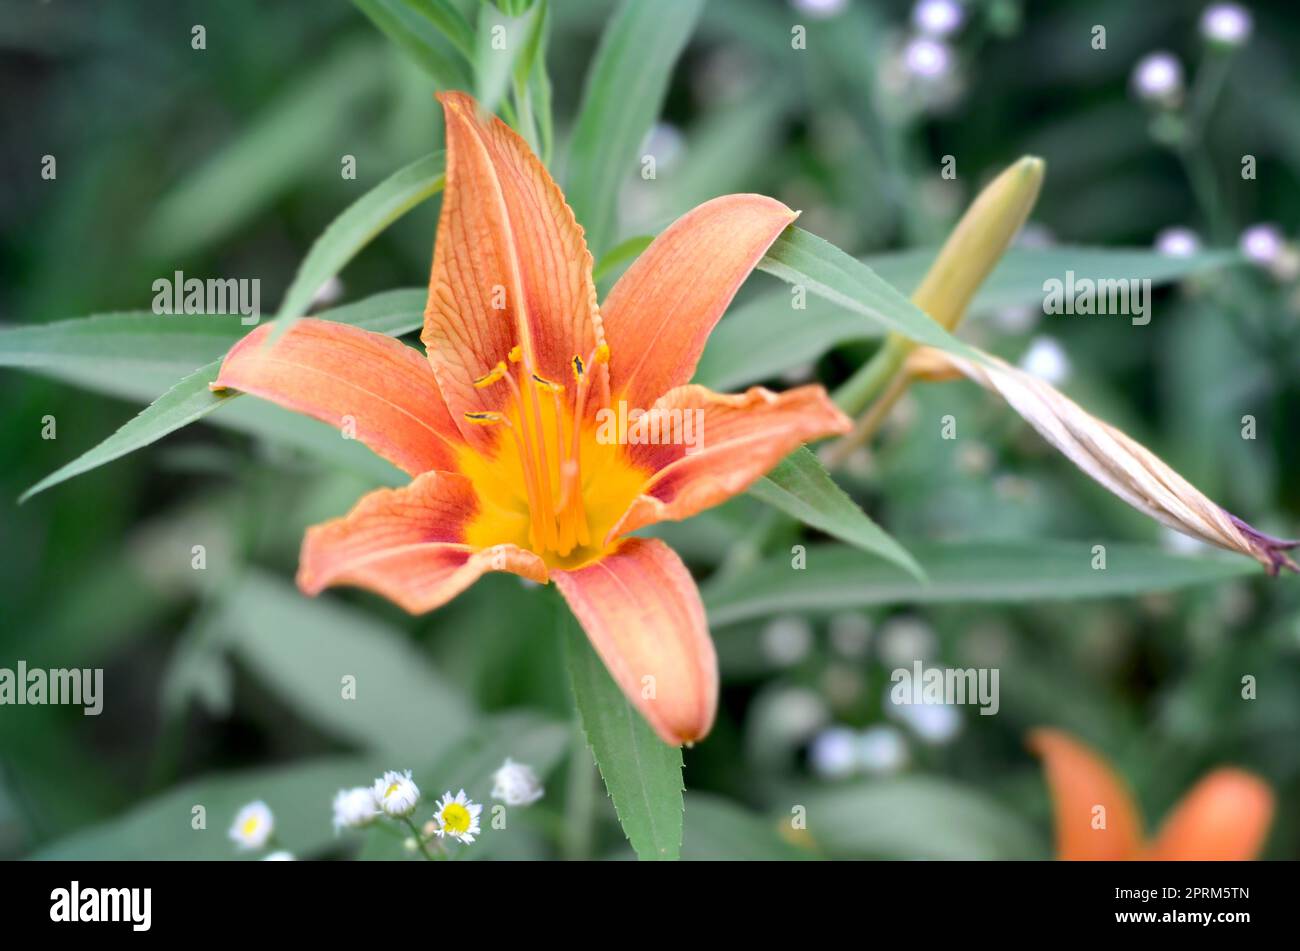 Orange lily flowers with green stems grow in a country house garden. Lilium bulbiferum is a herbaceous European lily with underground bulbs Stock Photo